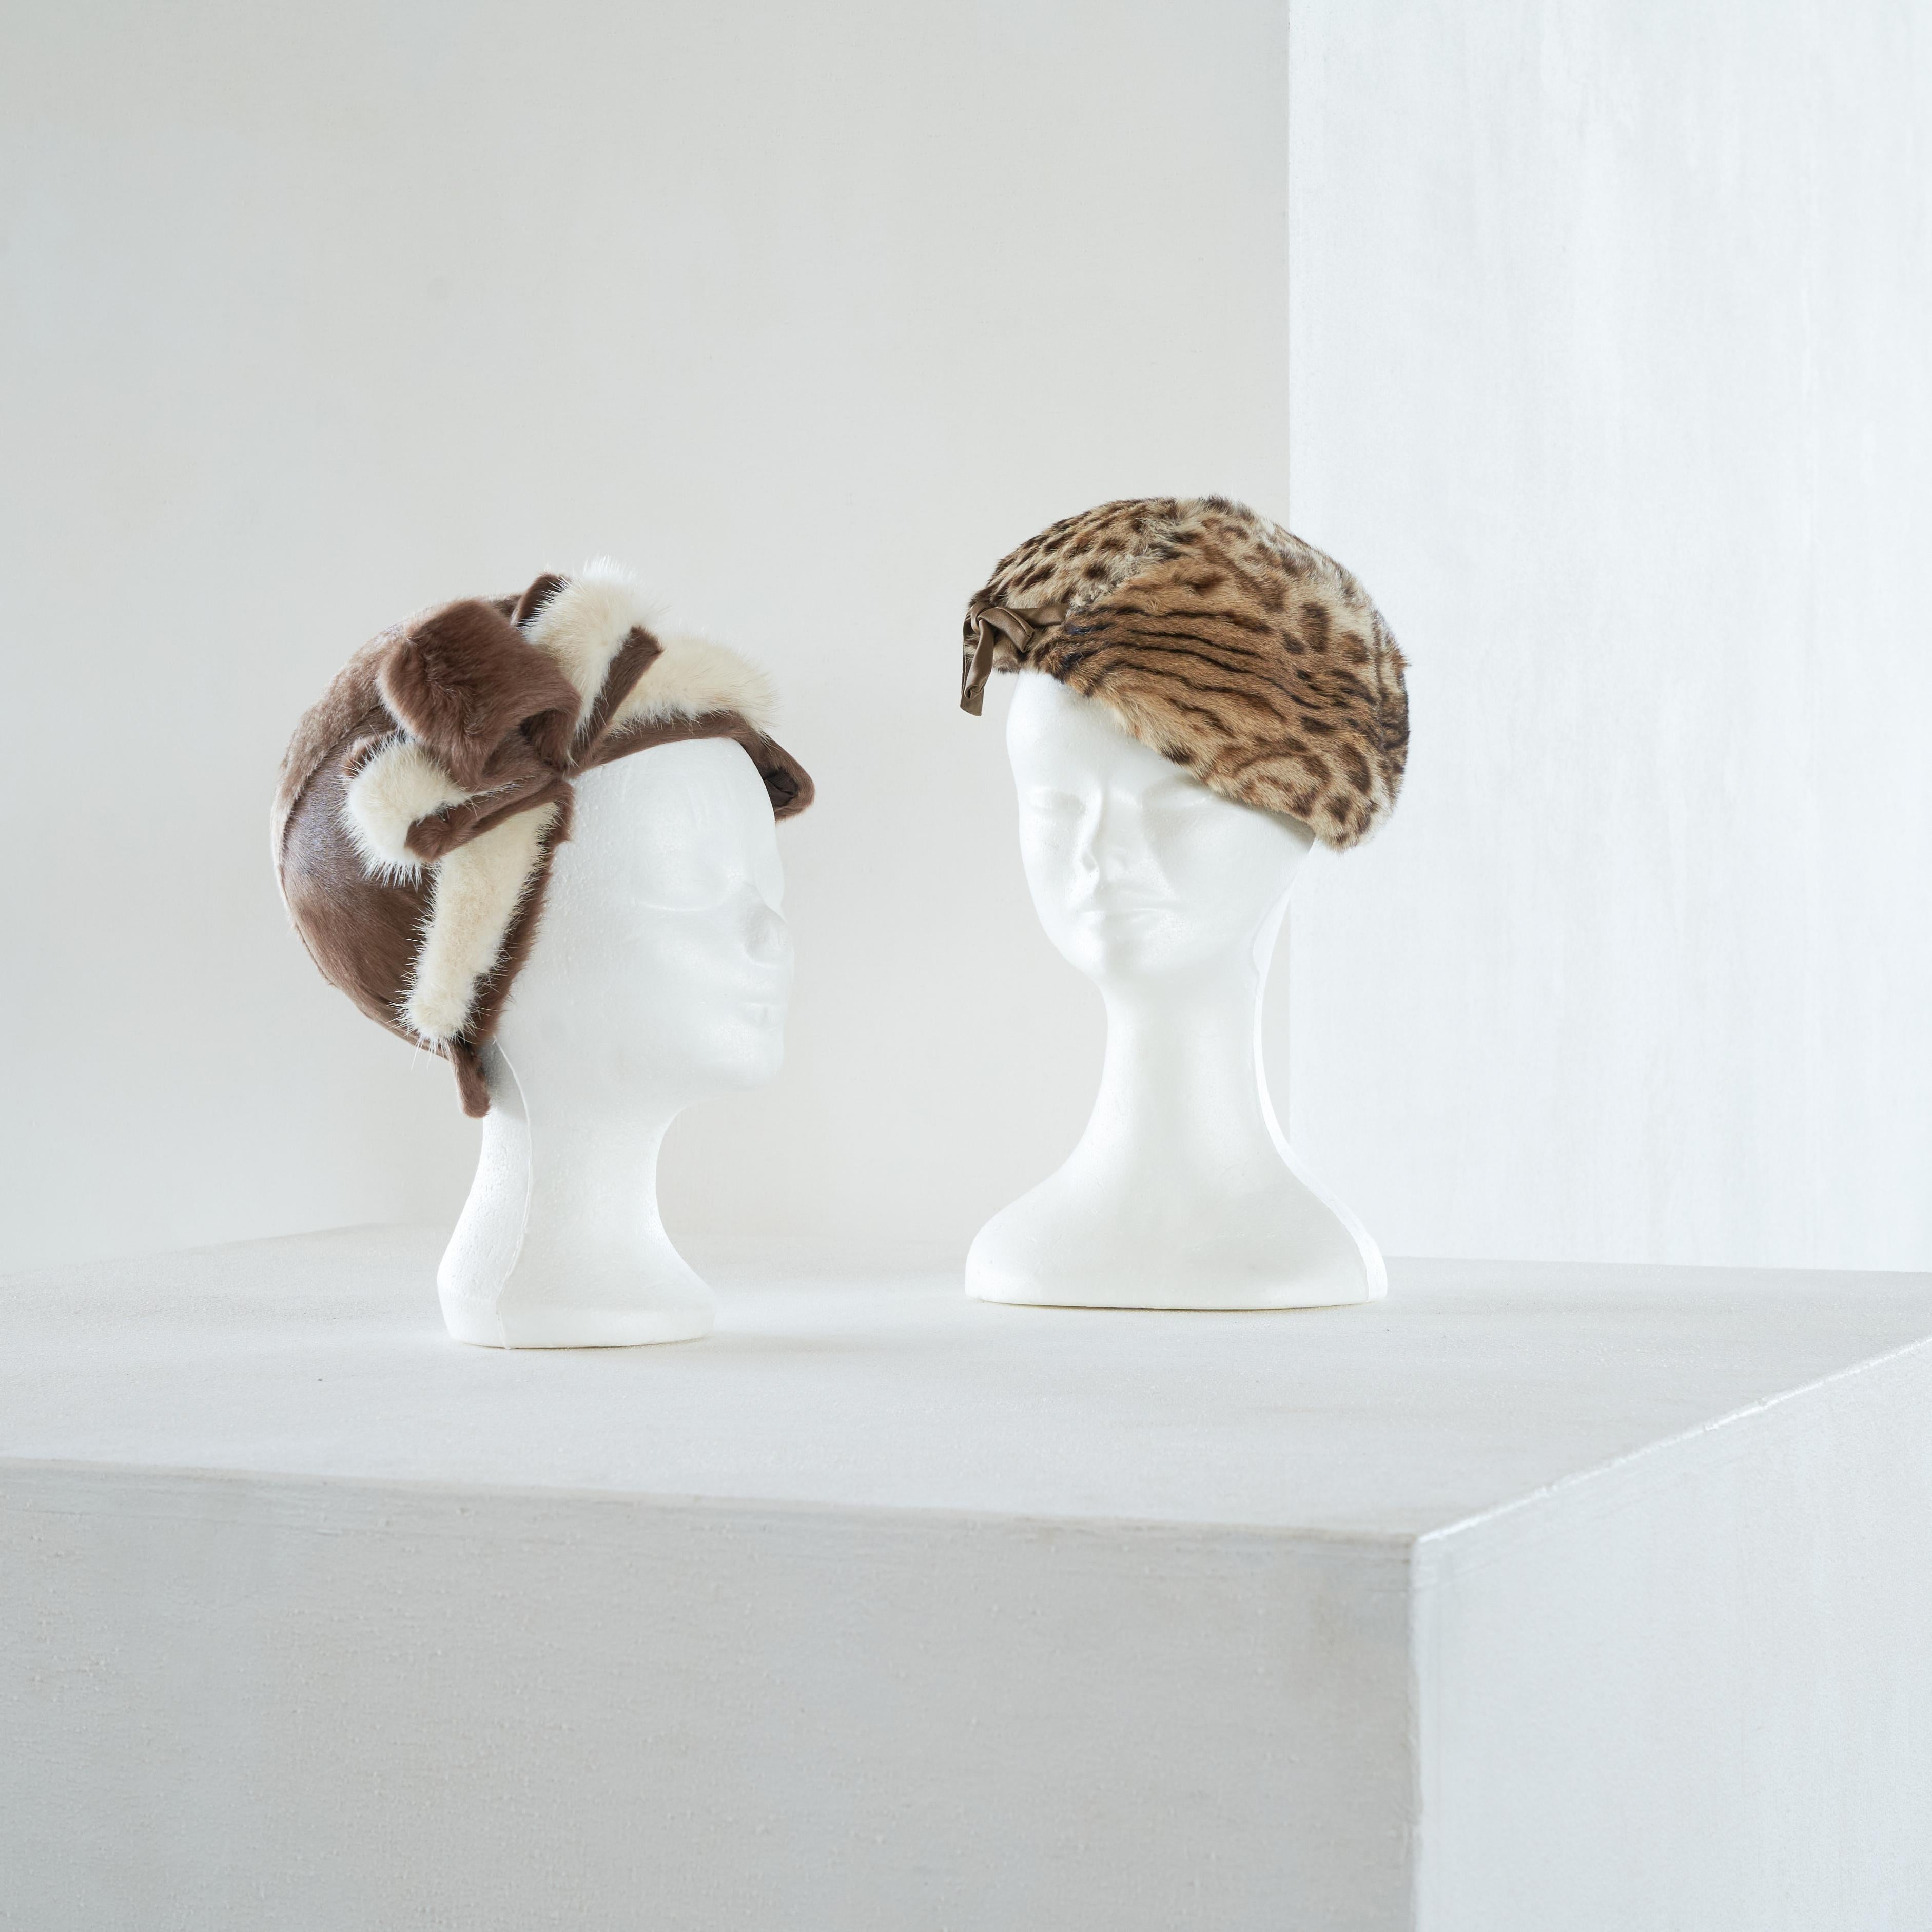 'Maison Kuiper' pair of 2 fur beret style hats, The Netherlands, 1950s.

This is a rare pair of beret style hats in fur made by 'Maison Kuiper' a very high-end boutique in Zeist, The Netherlands. Maison Kuiper was one of the most luxurious stores